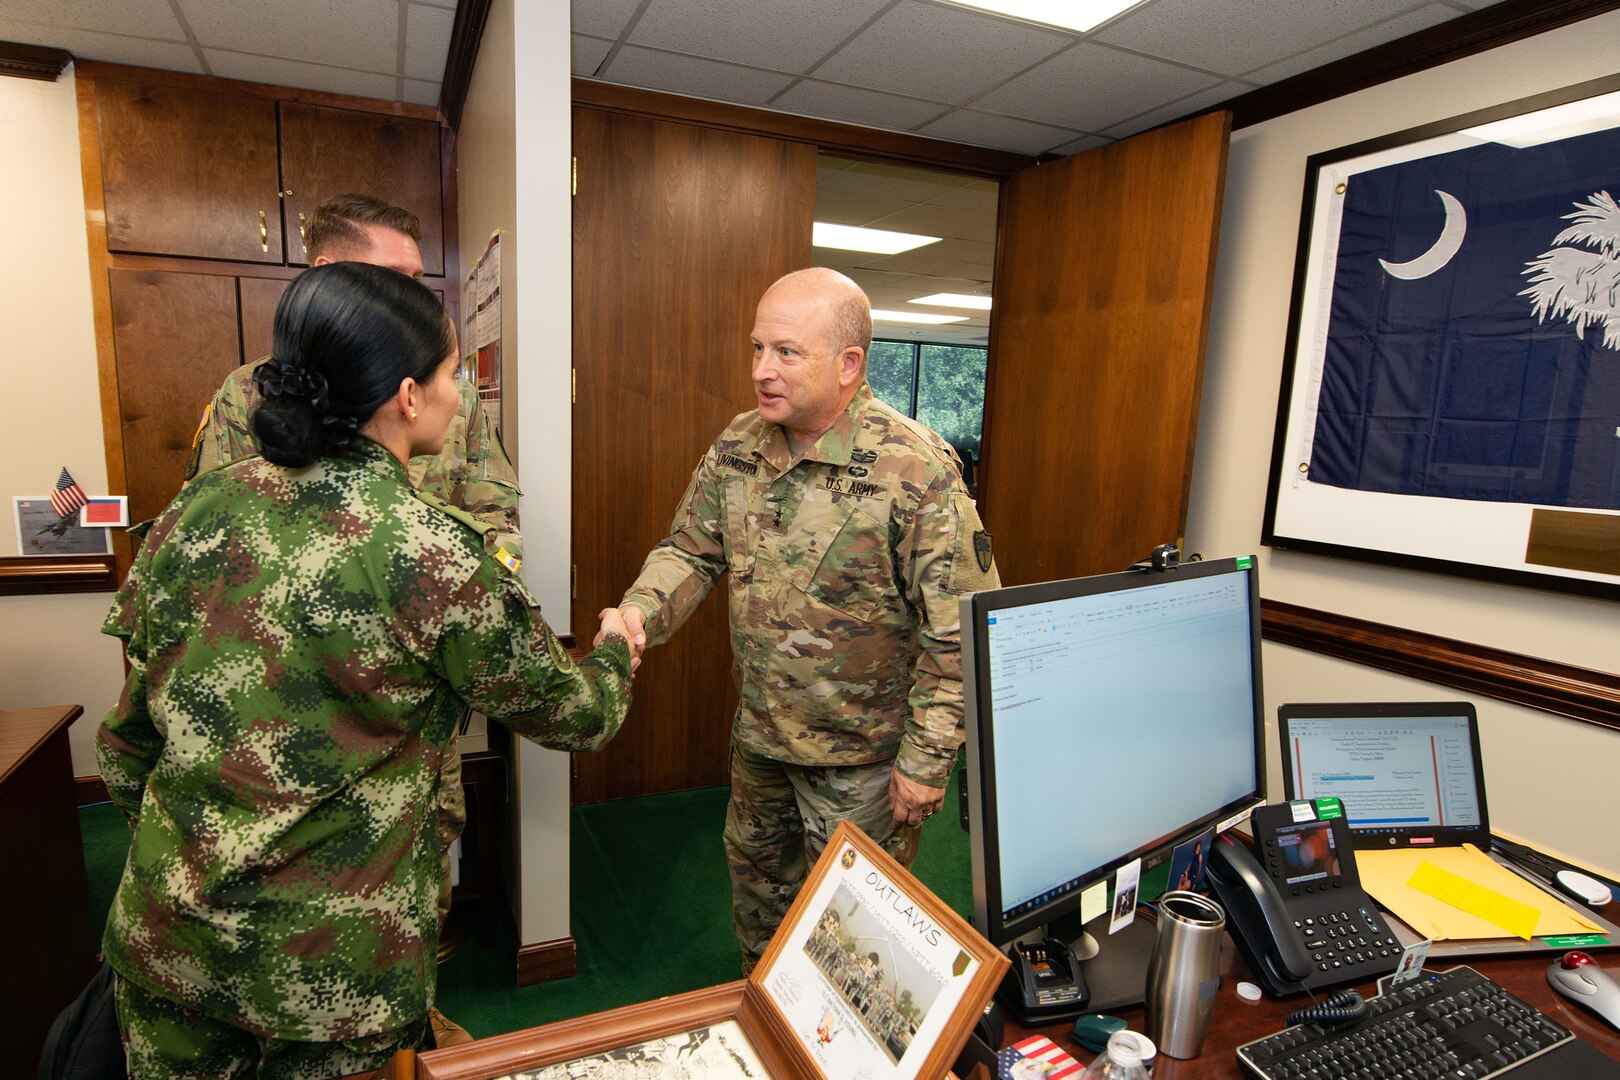 Republic of Colombia army judge advocates meet with U.S. Army Maj. Gen. Robert E. Livingston, Jr., the adjutant general for the South Carolina National Guard. The JAGs are visiting South Carolina to collaborate on ideas during the transformation of the Colombian military justice systems, Columbia, S.C., Aug. 29, 2018.